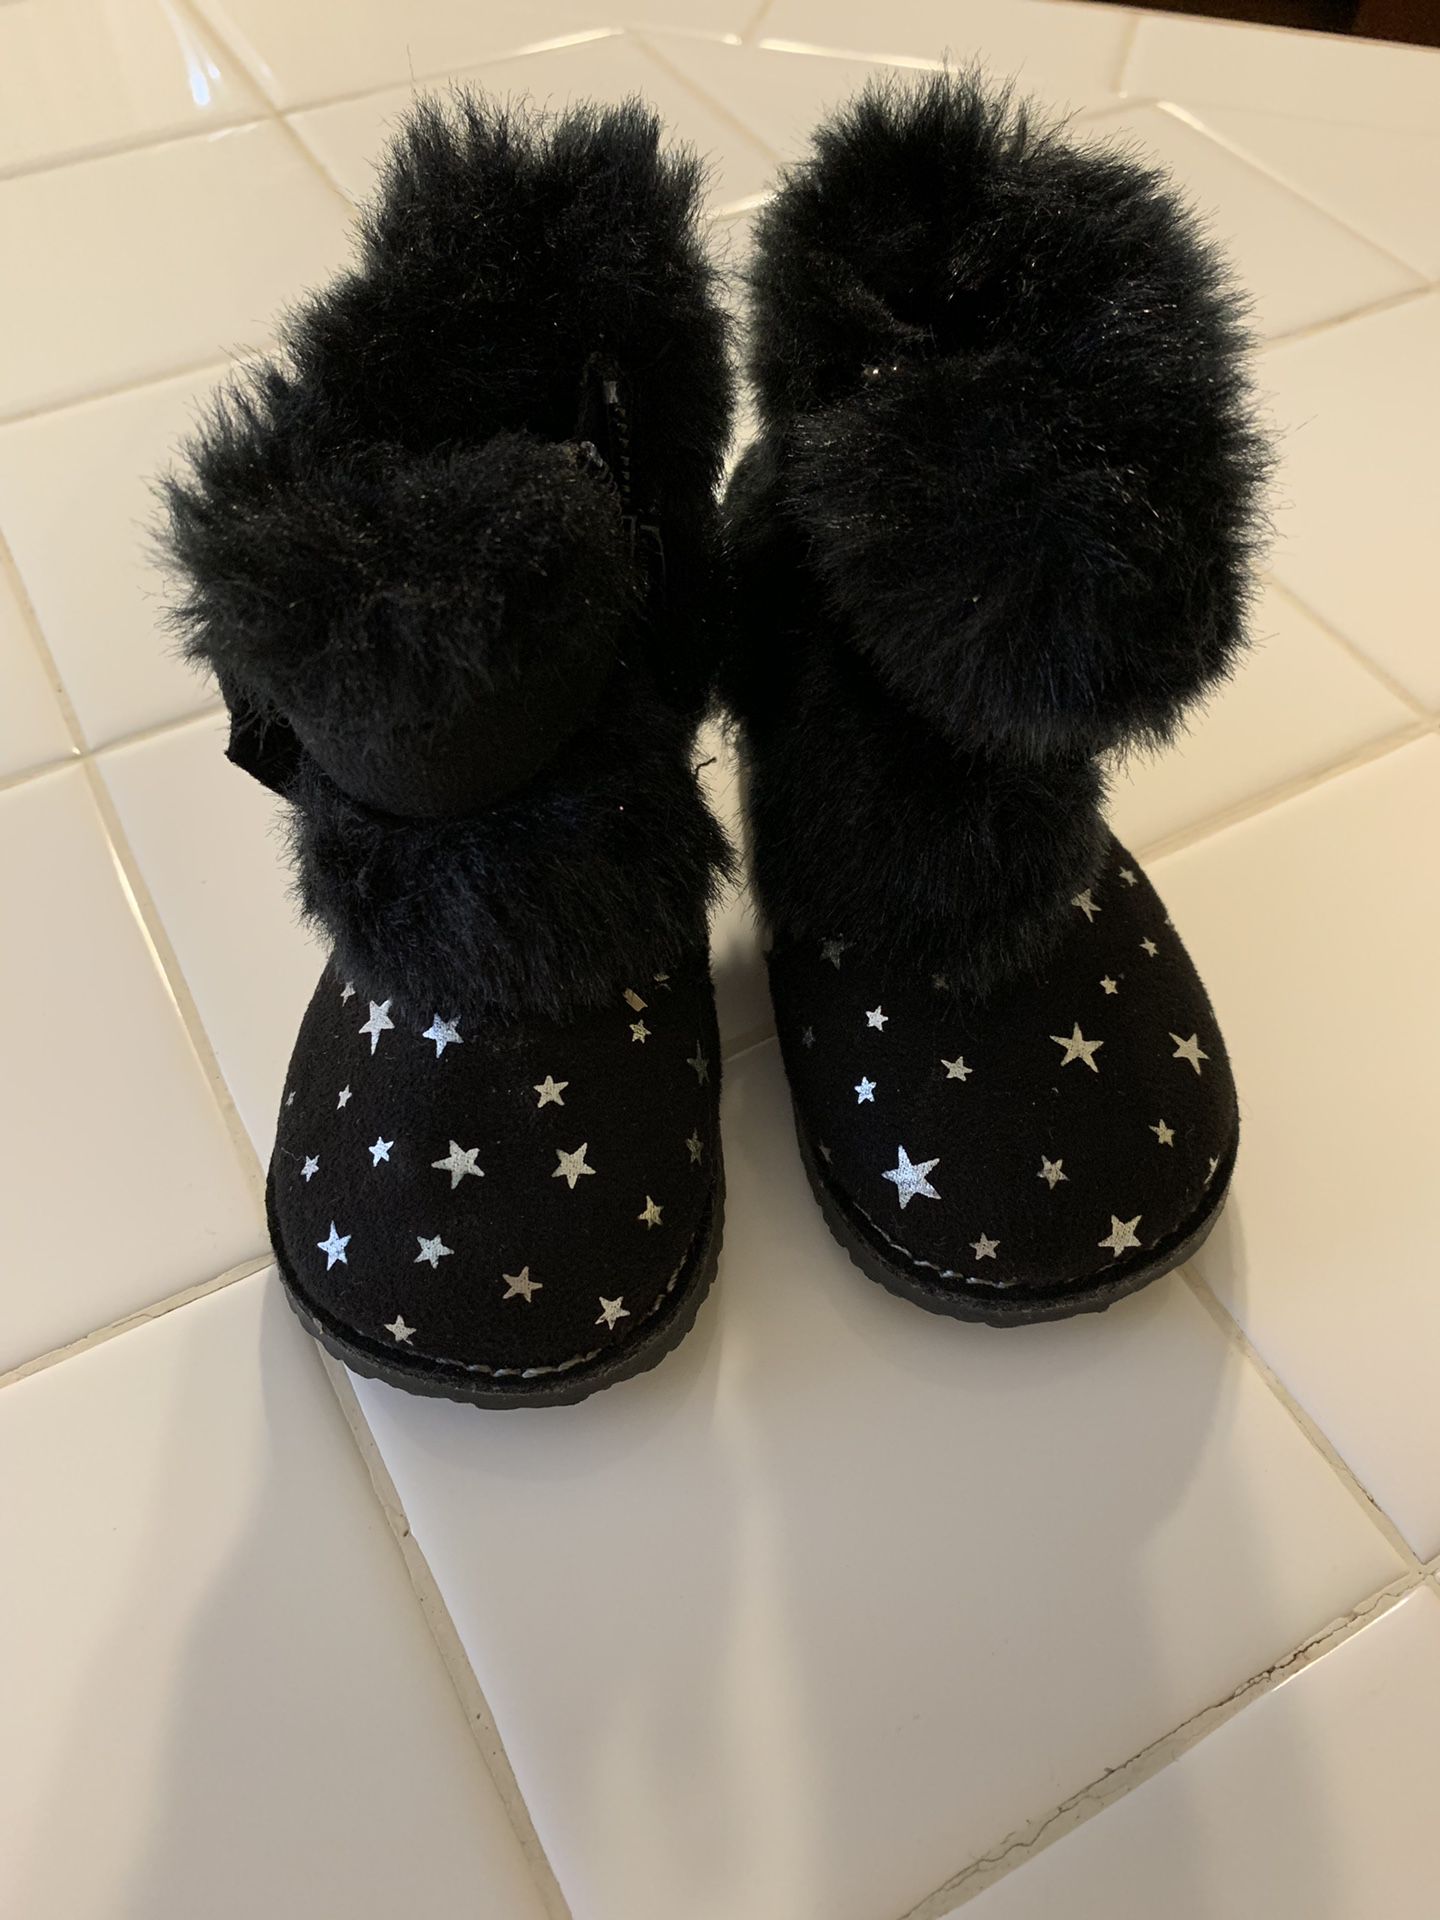 Black baby girl boots